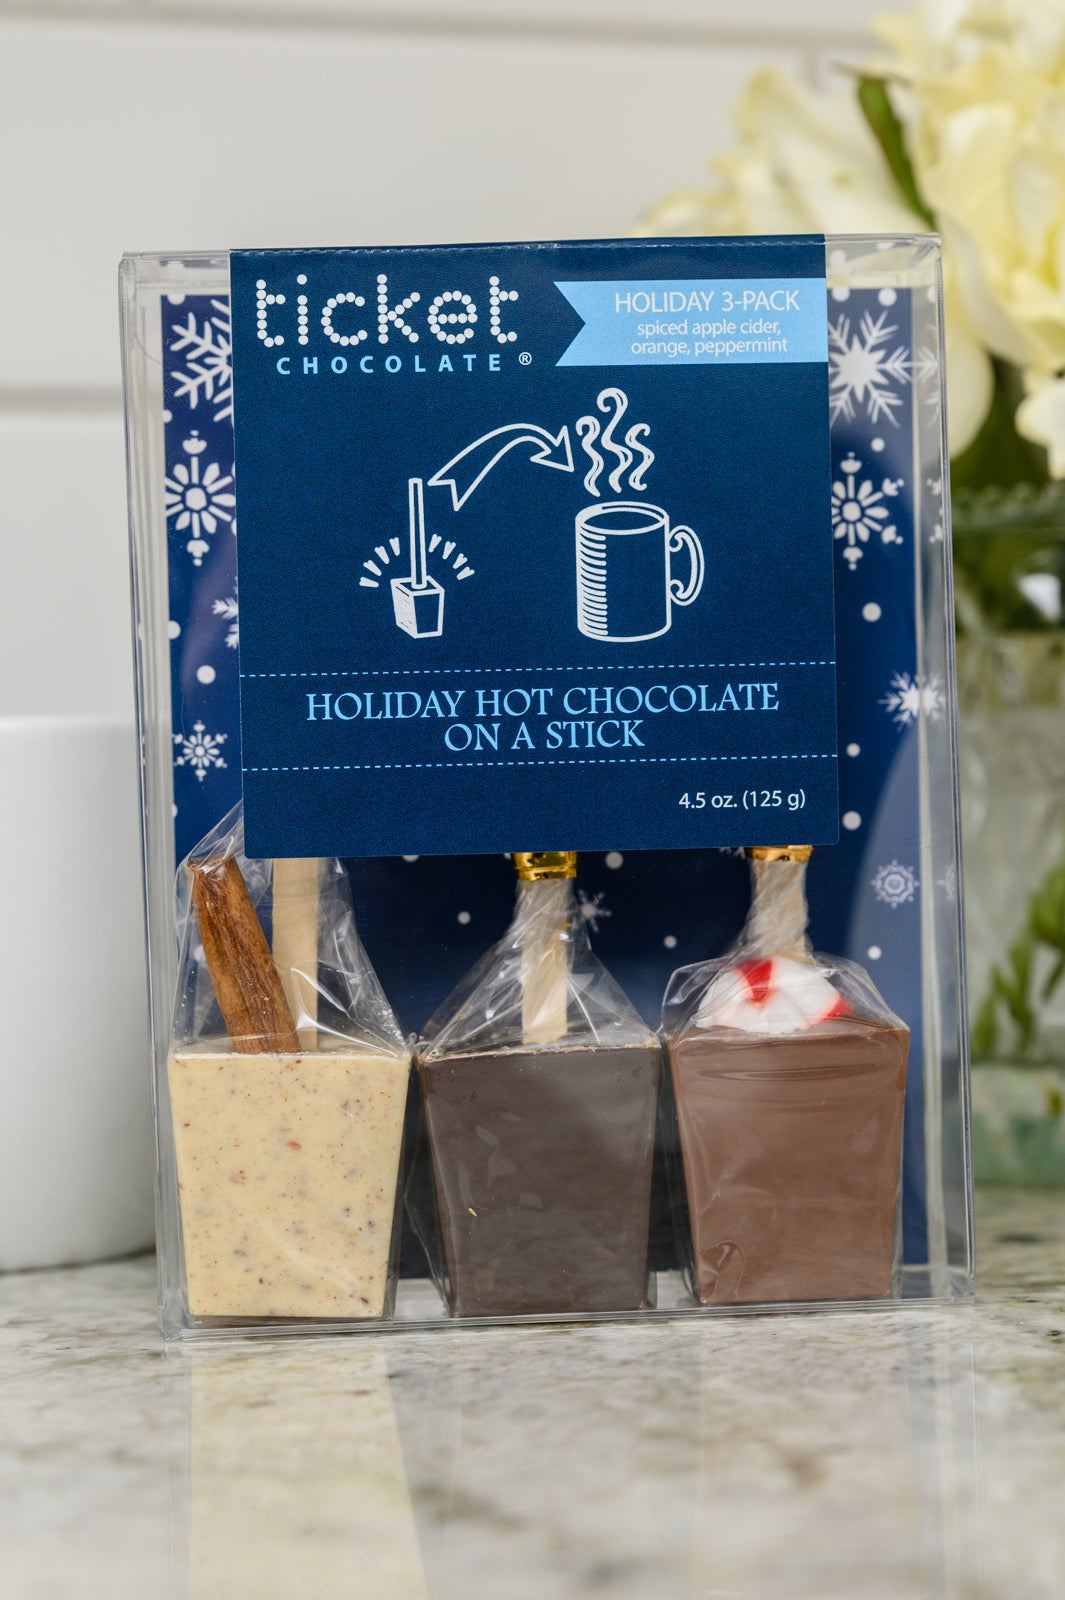 Holiday Hot Chocolate On A Stick Set #1 (Online Exclusive)